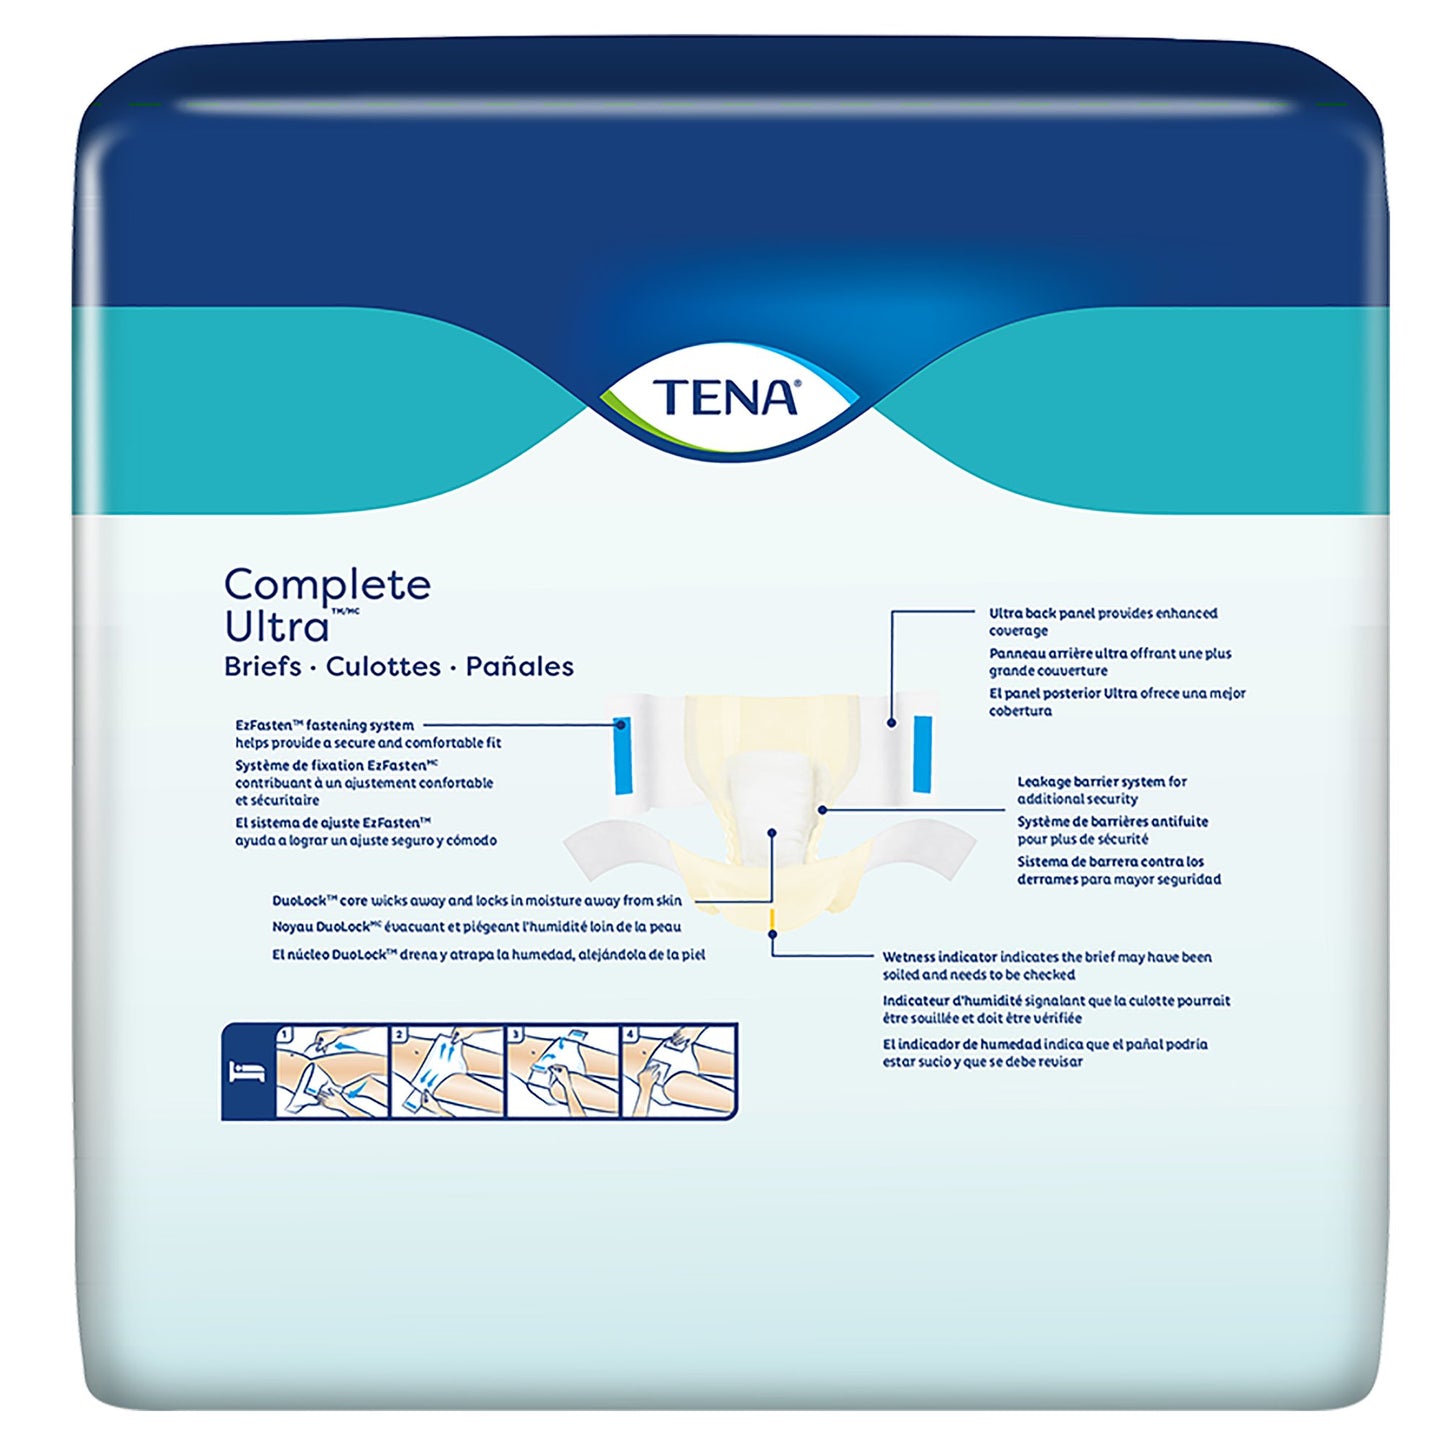 Tena® Complete Ultra™ Incontinence Brief, XL, 24 ct